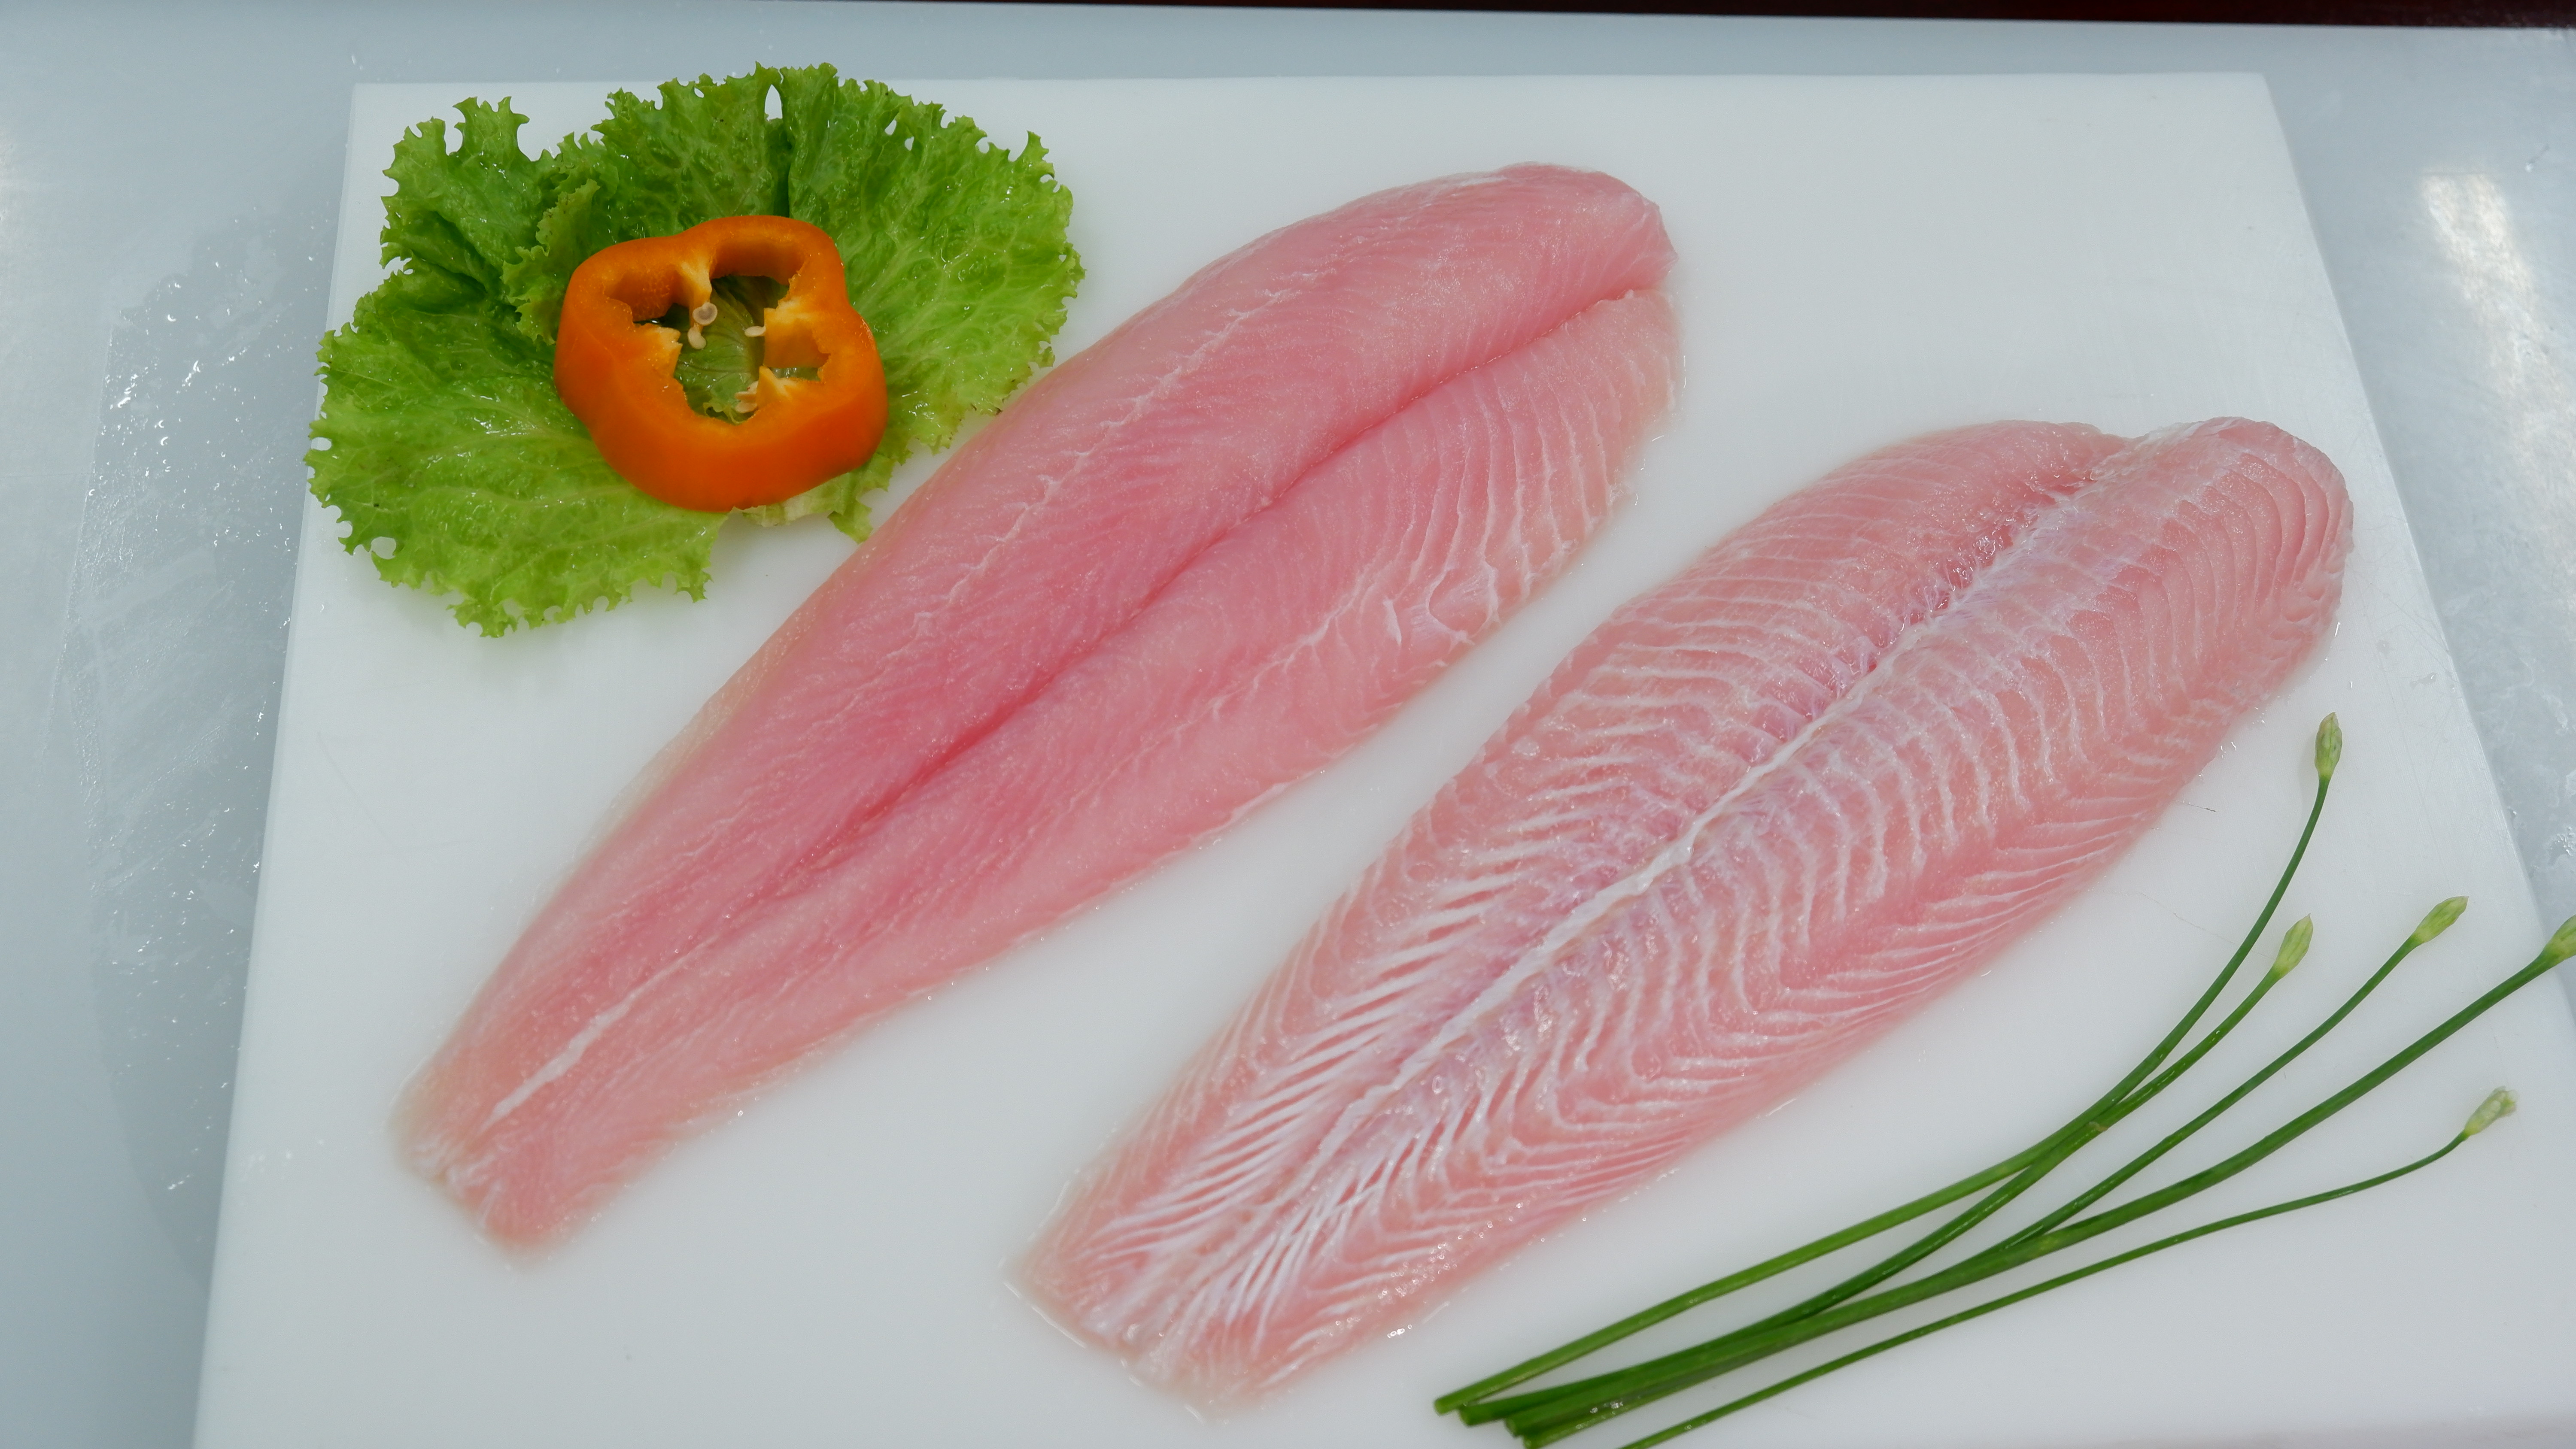 <span  class="uc_style_uc_tiles_grid_image_elementor_uc_items_attribute_title" style="color:#ffffff;">Pangasius Fillet with CO treatment</span>